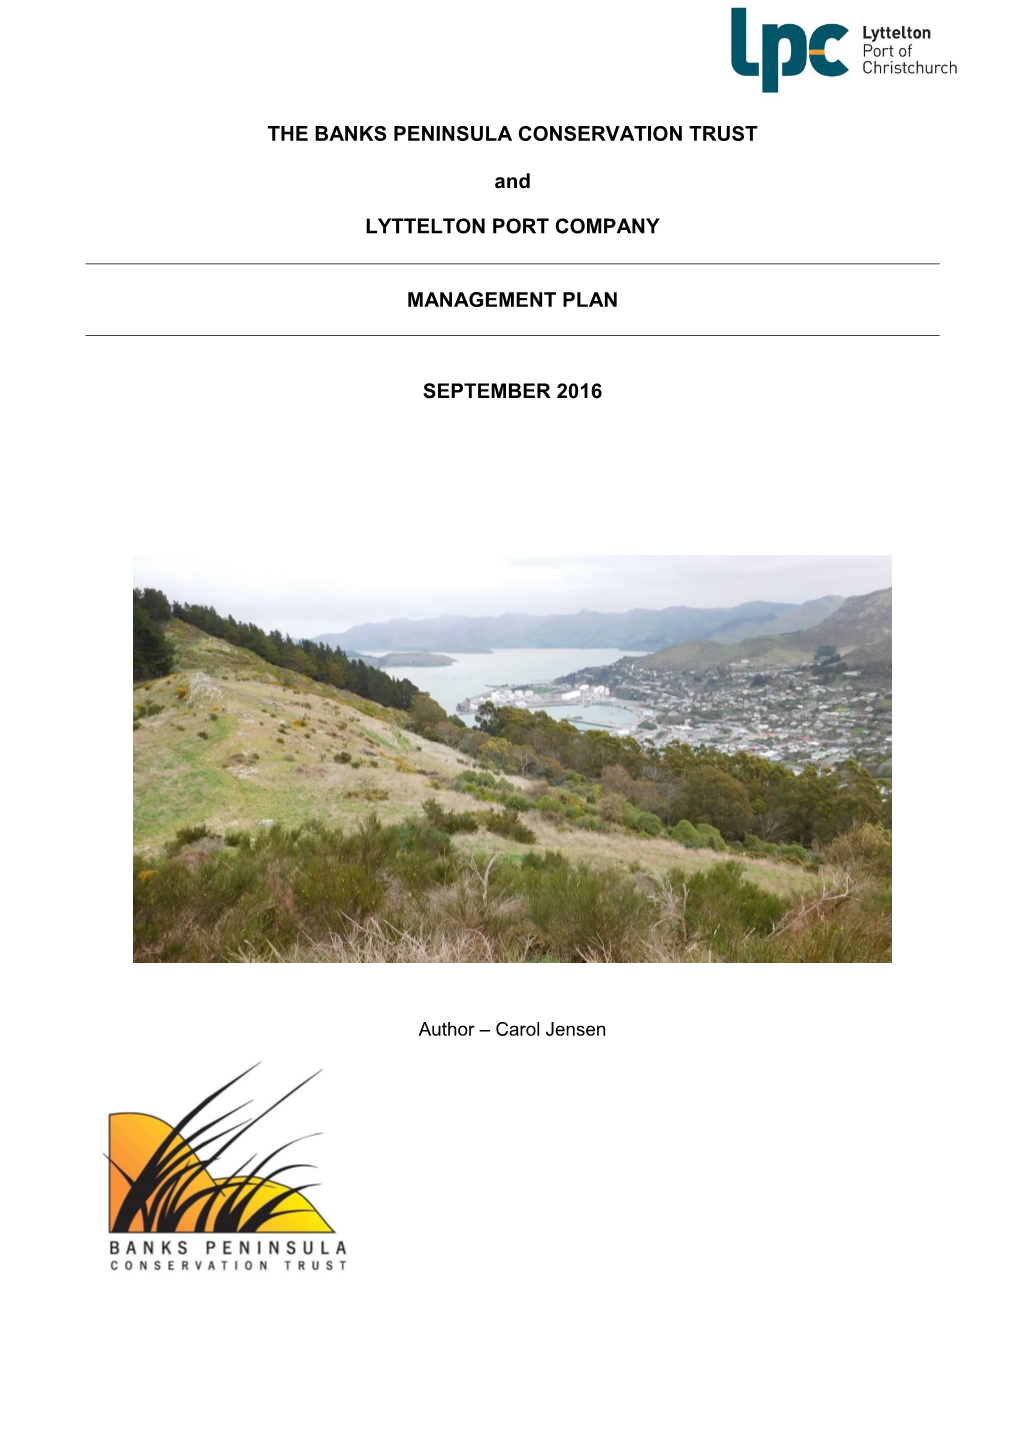 THE BANKS PENINSULA CONSERVATION TRUST And